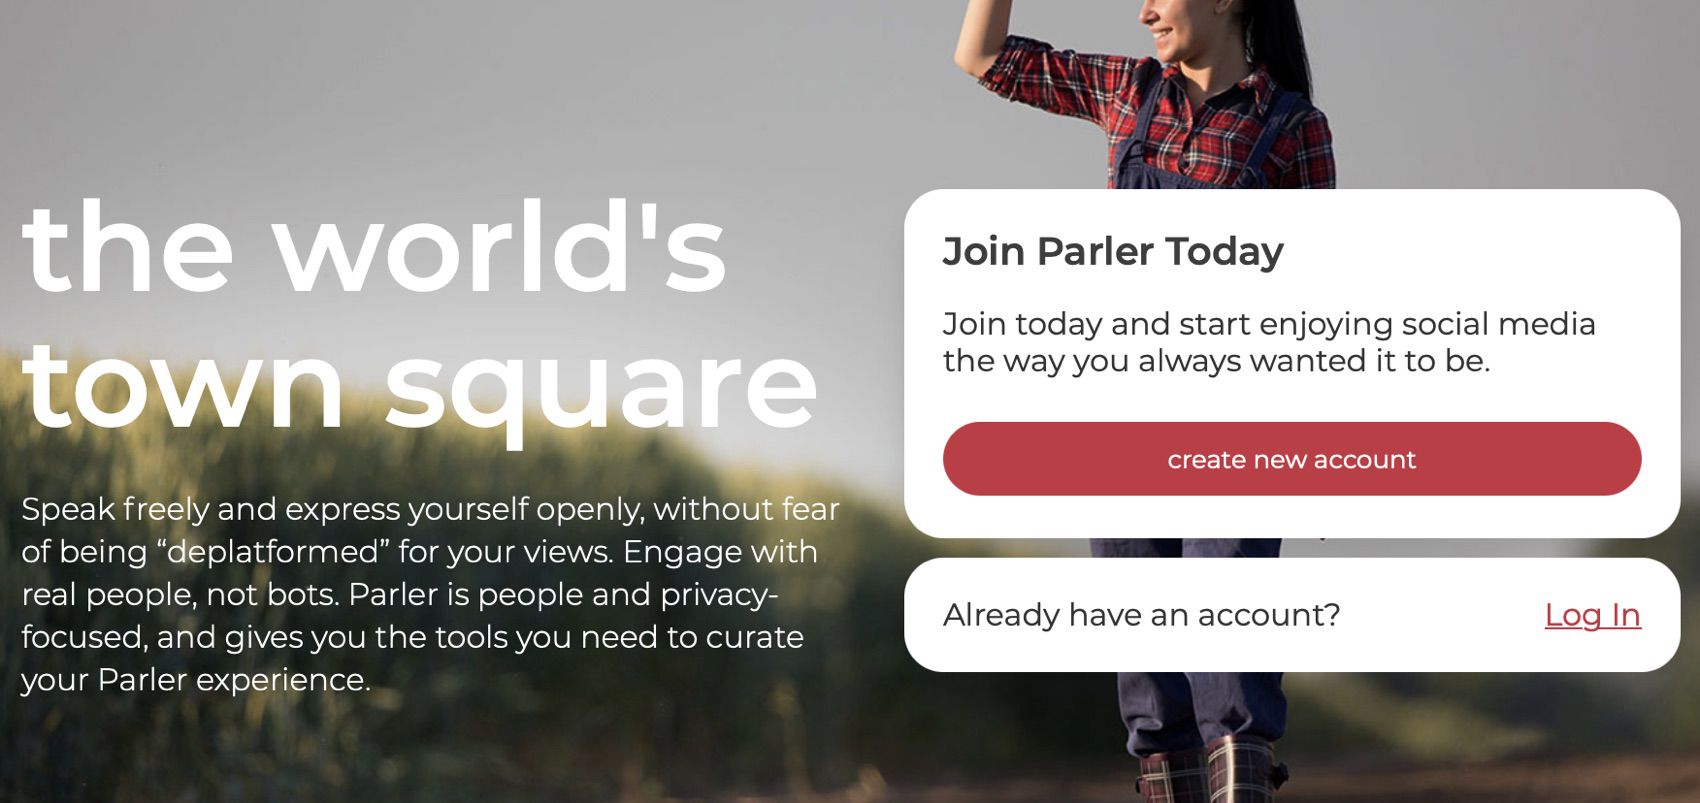 photo of Apple Threatens to Ban Parler From App Store as Twitter Bans Donald Trump image